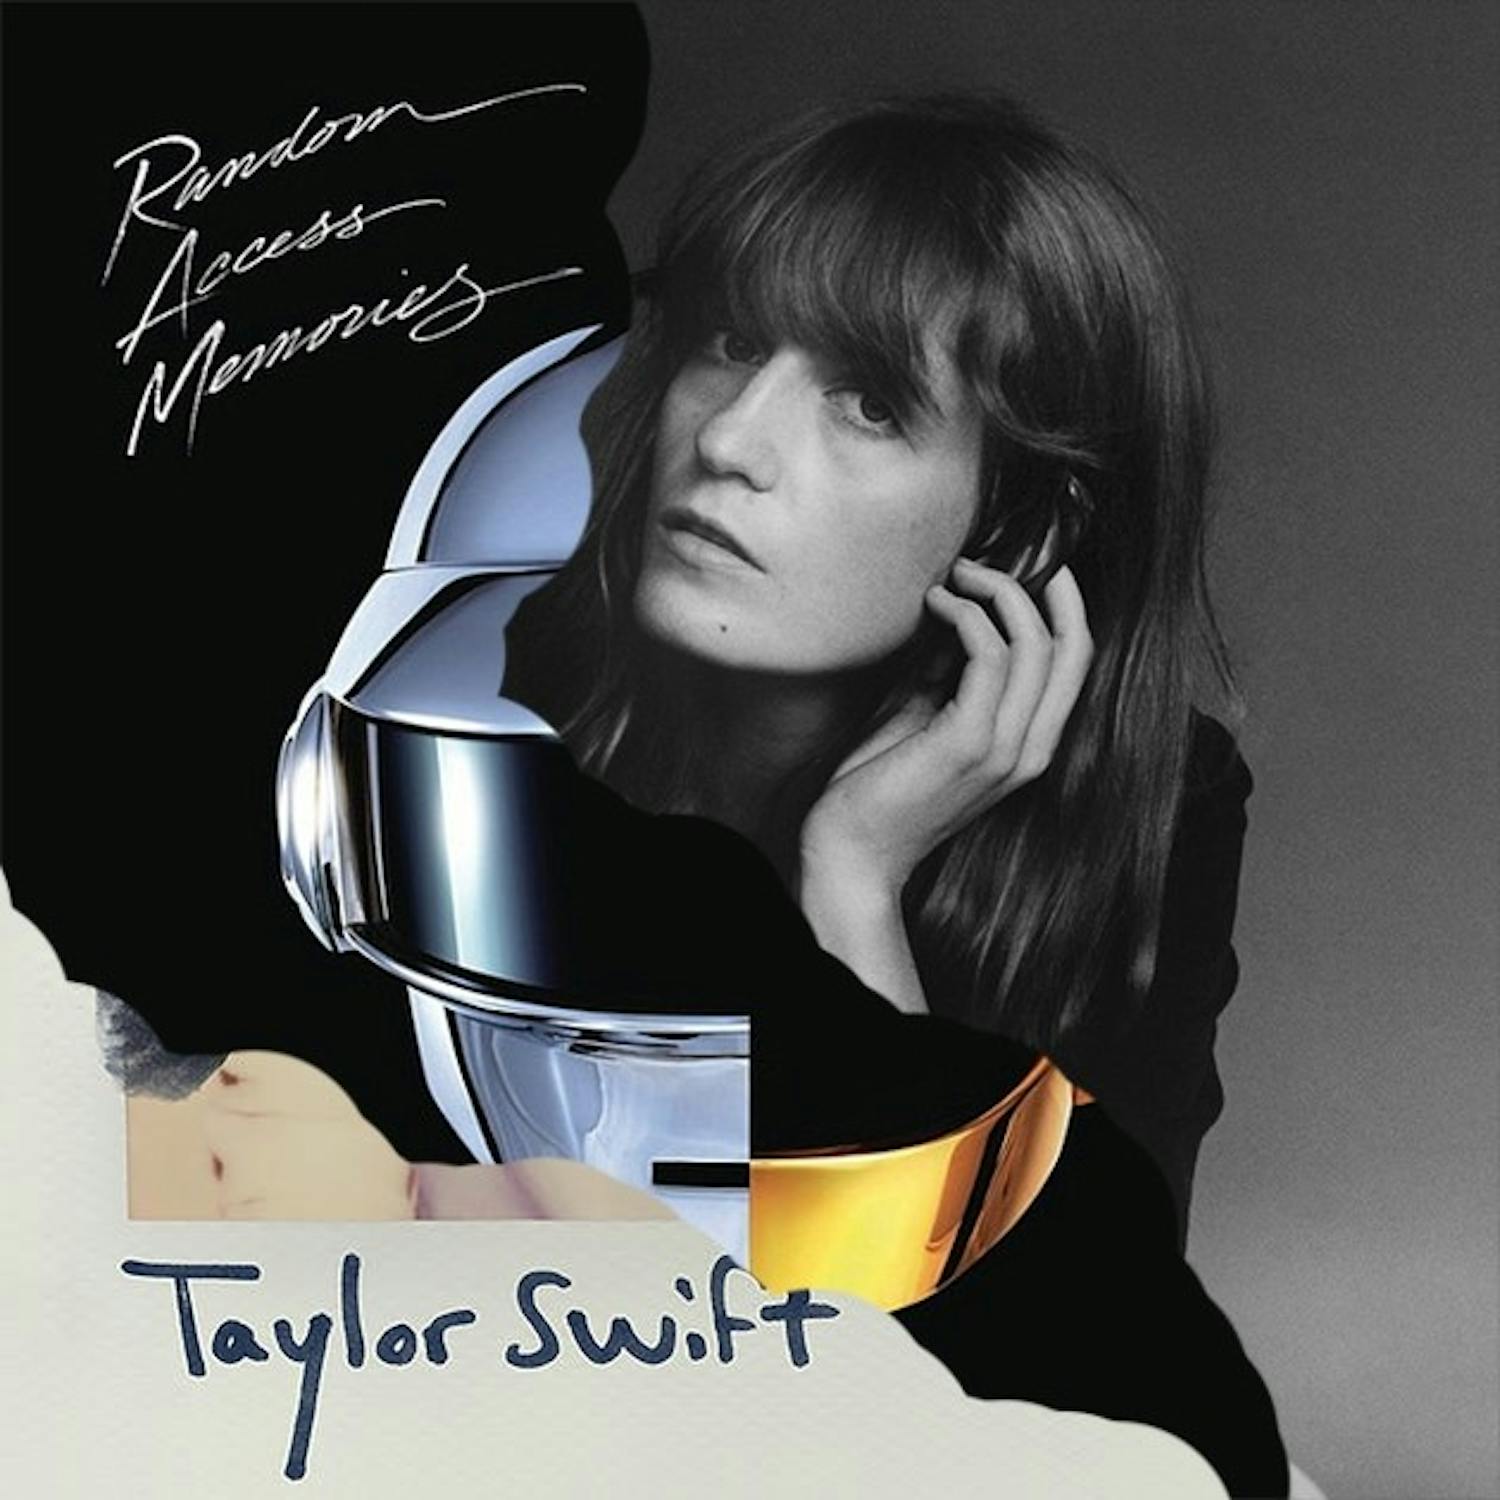 Includes album covers from Taylor Swift, Daft Punk and Florence and The Machine.